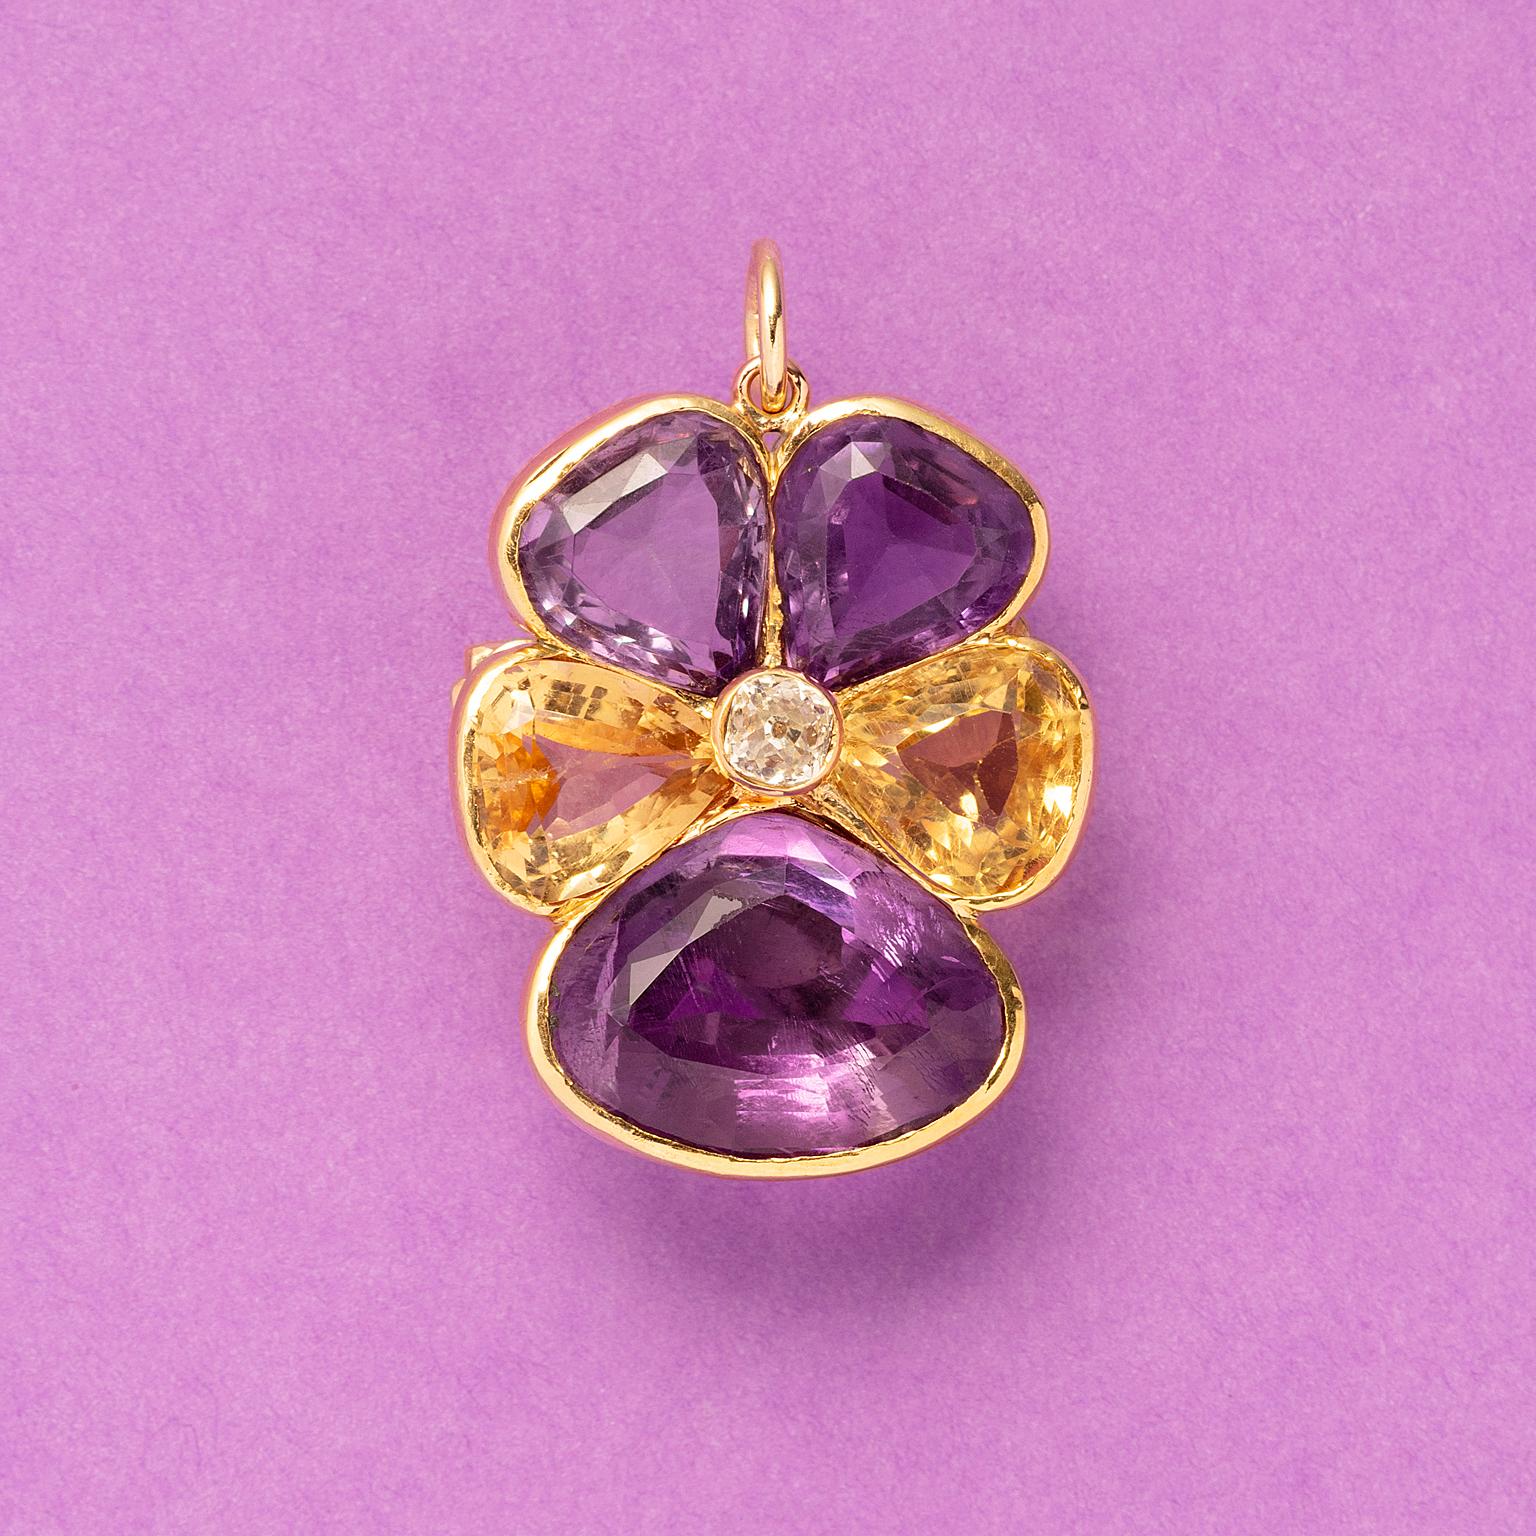 An 18 carat yellow gold pansy brooch or pendant set with three amethyst petals and two citrine petals on the sides, with a brilliant cut diamond at the heart of the flower French assay mark of a  